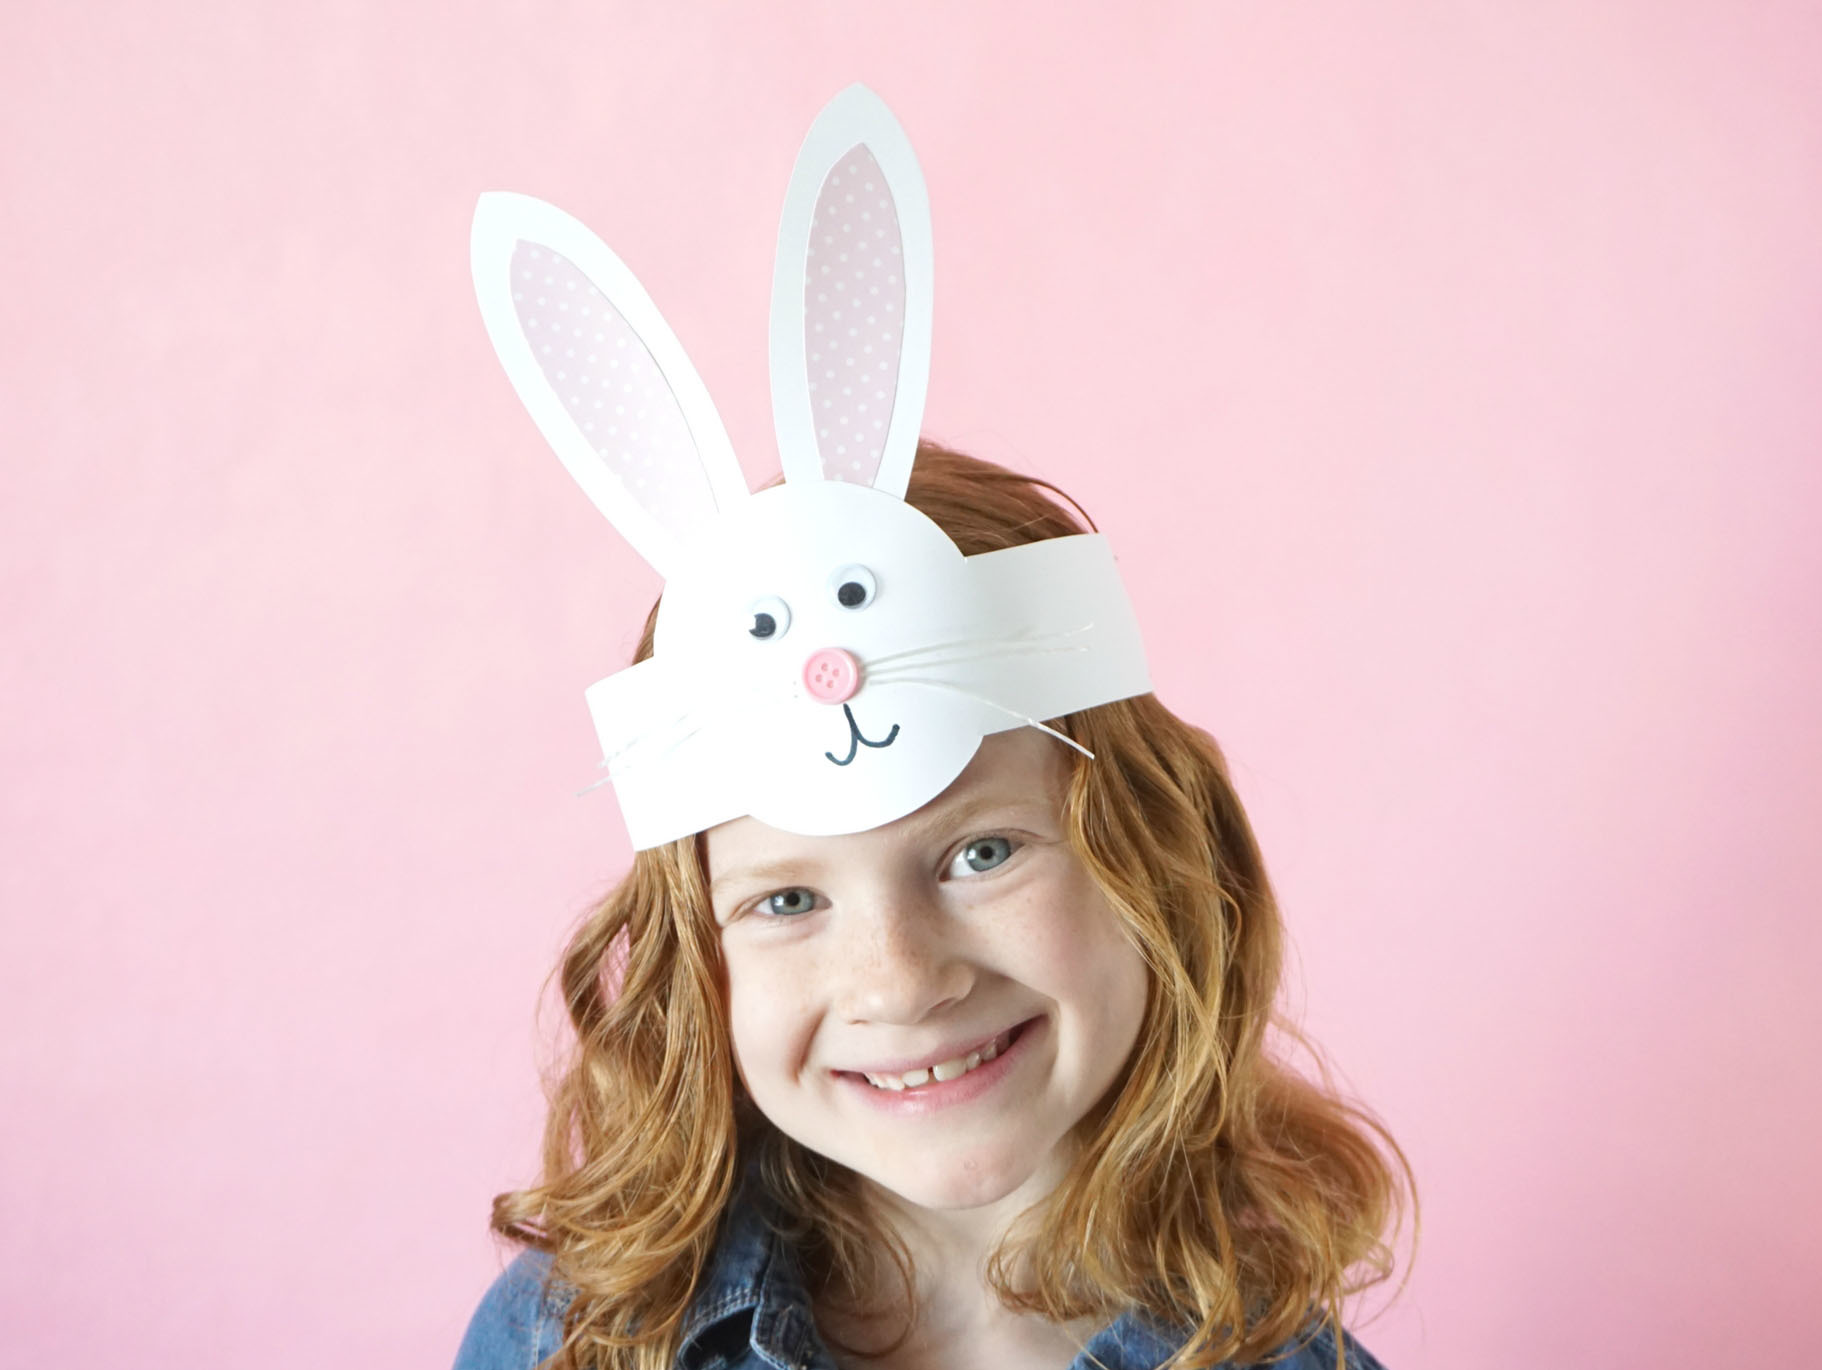 Free Printable Bunny Templates for Spring & Easter Crafts